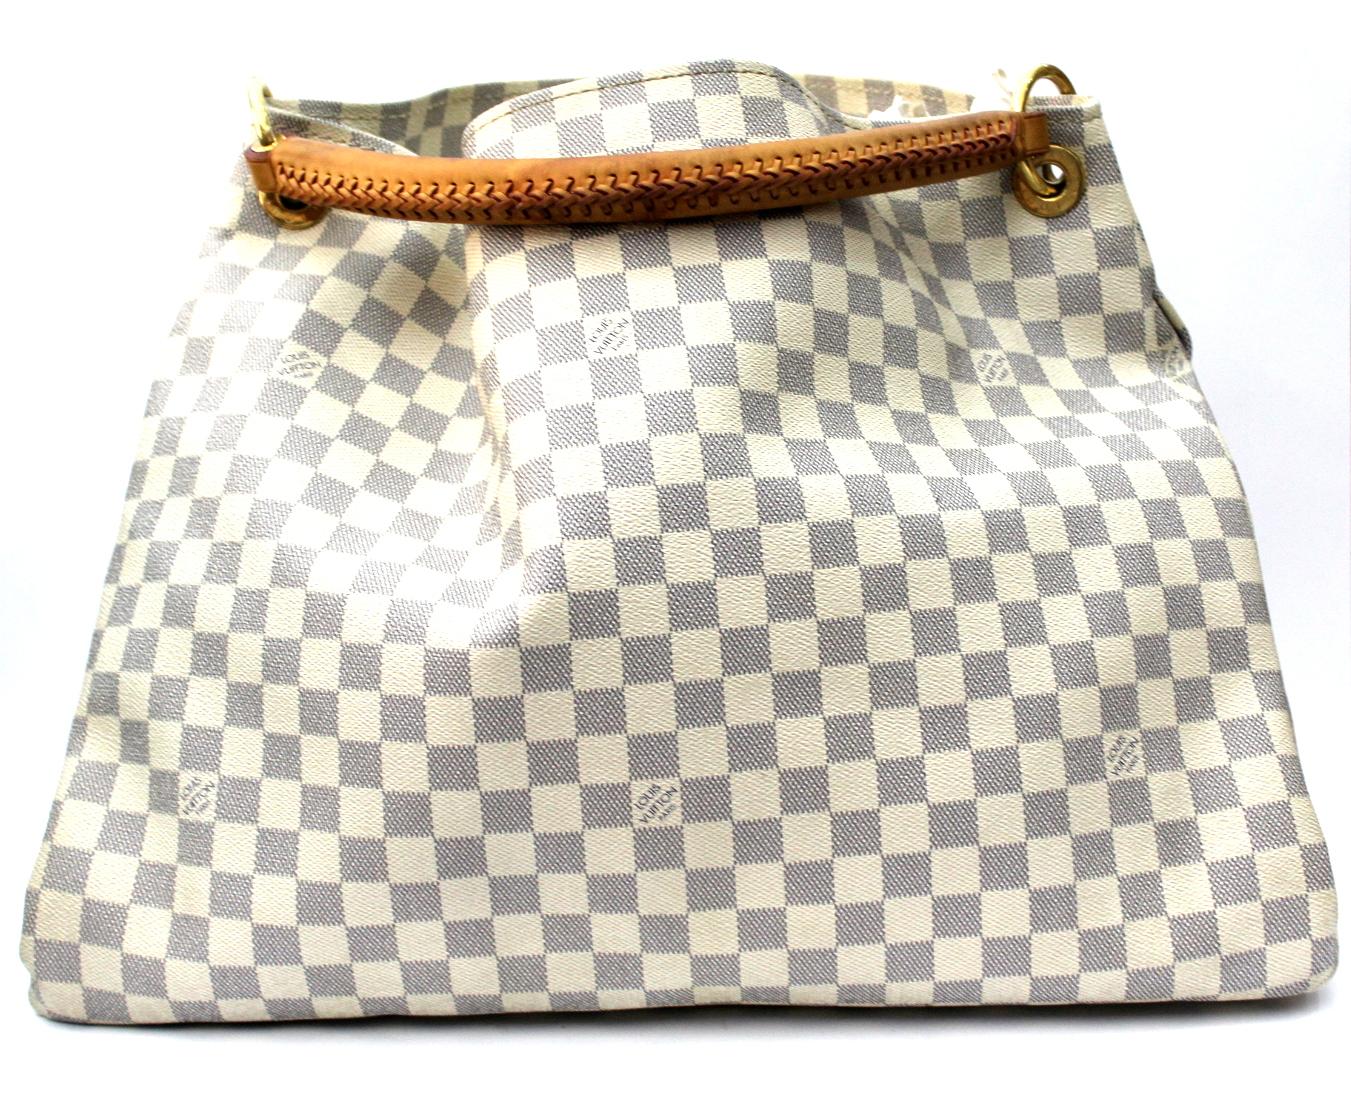 The Louis Vuitton Damier Azur Canvas Artsy GM Bag has a unique and modern structure. This roomy tote makes a perfect work or weekend bag, large enough to hold all your essentials in style. It features a detachable stylish Louis Vuitton key ring for